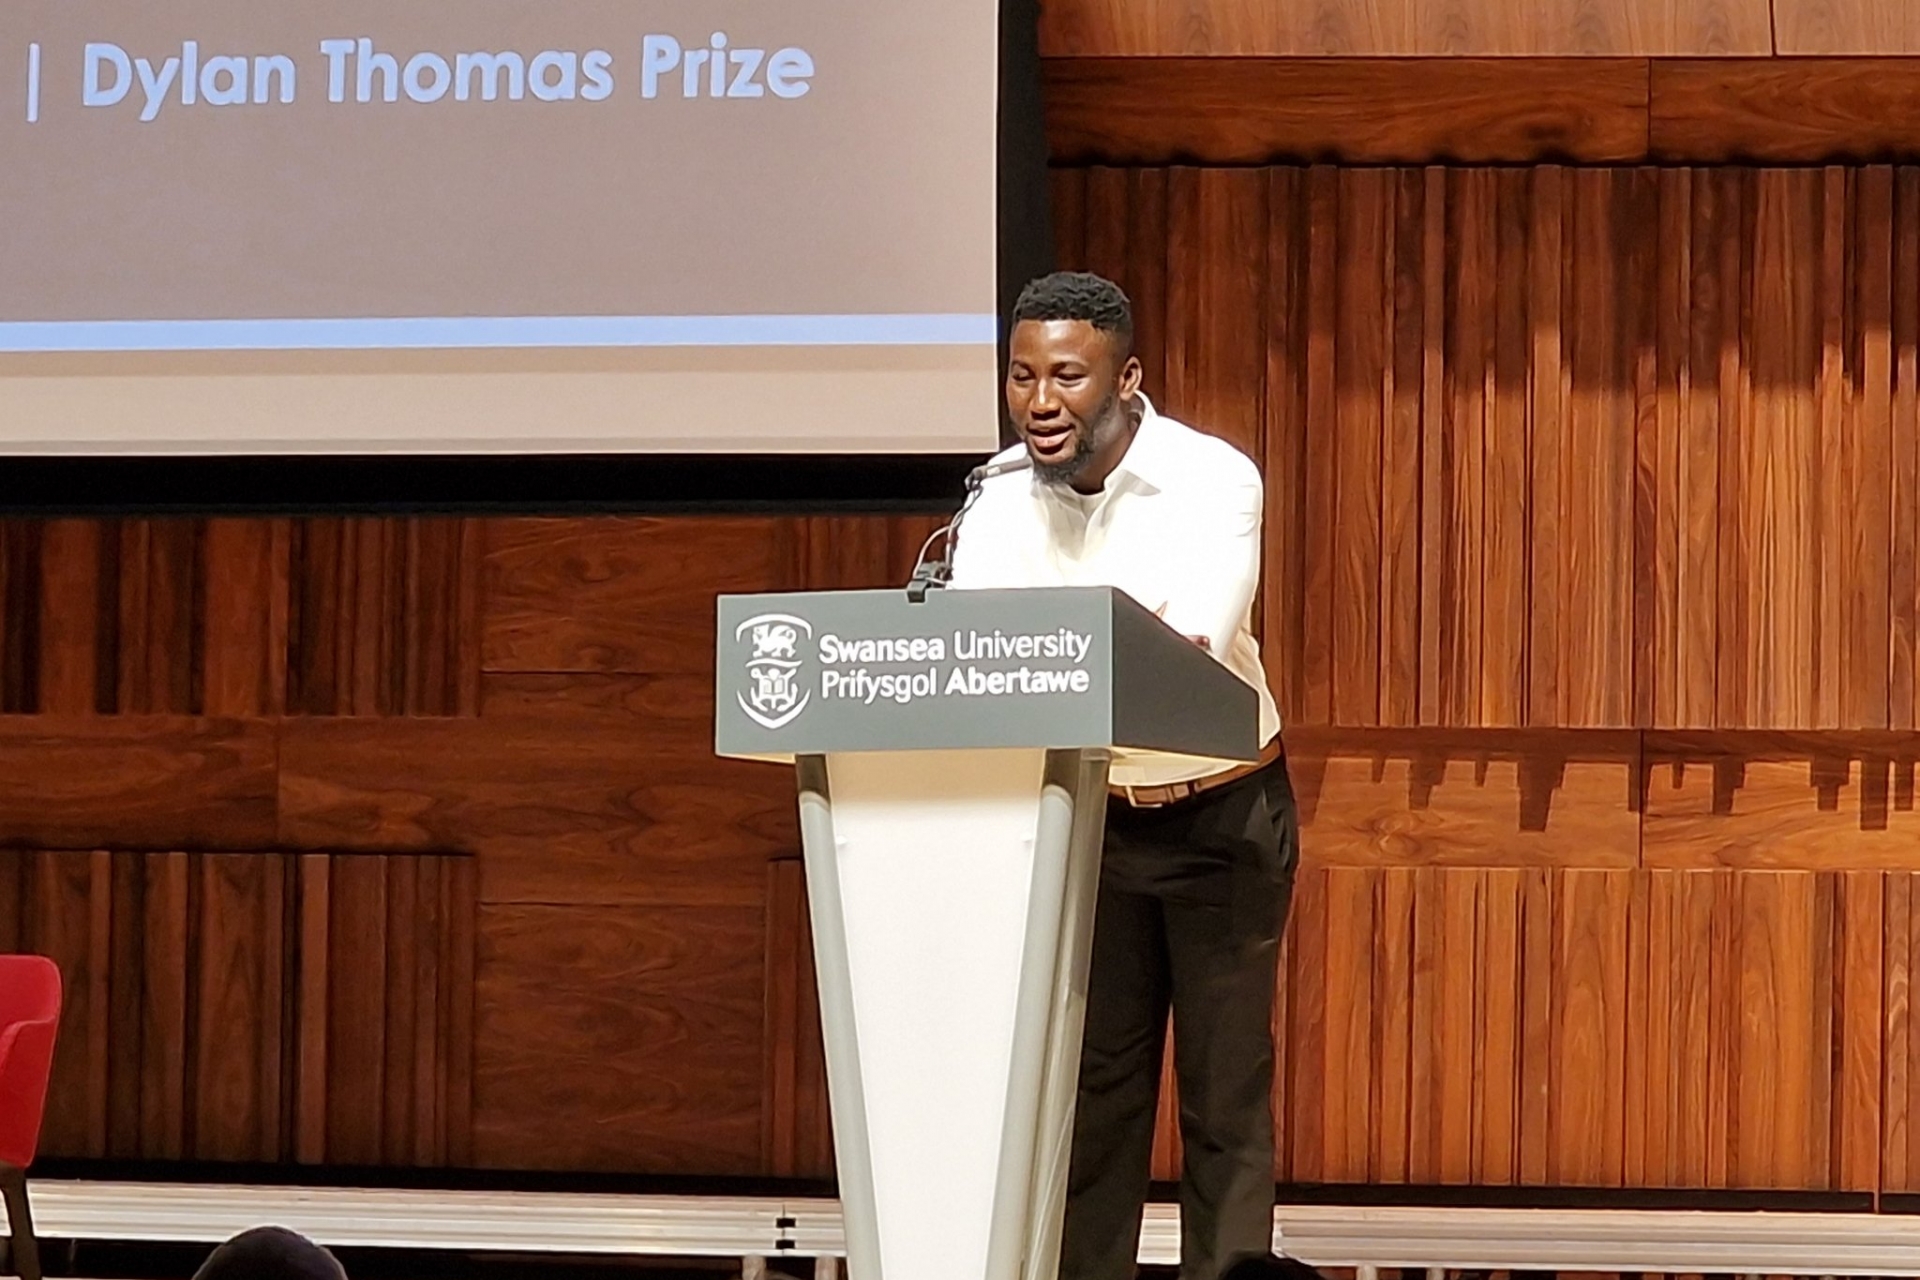 Debut God’s Children Are Little Broken Things by Arinze Ifeakandu takes the 2023 Dylan Thomas Prize